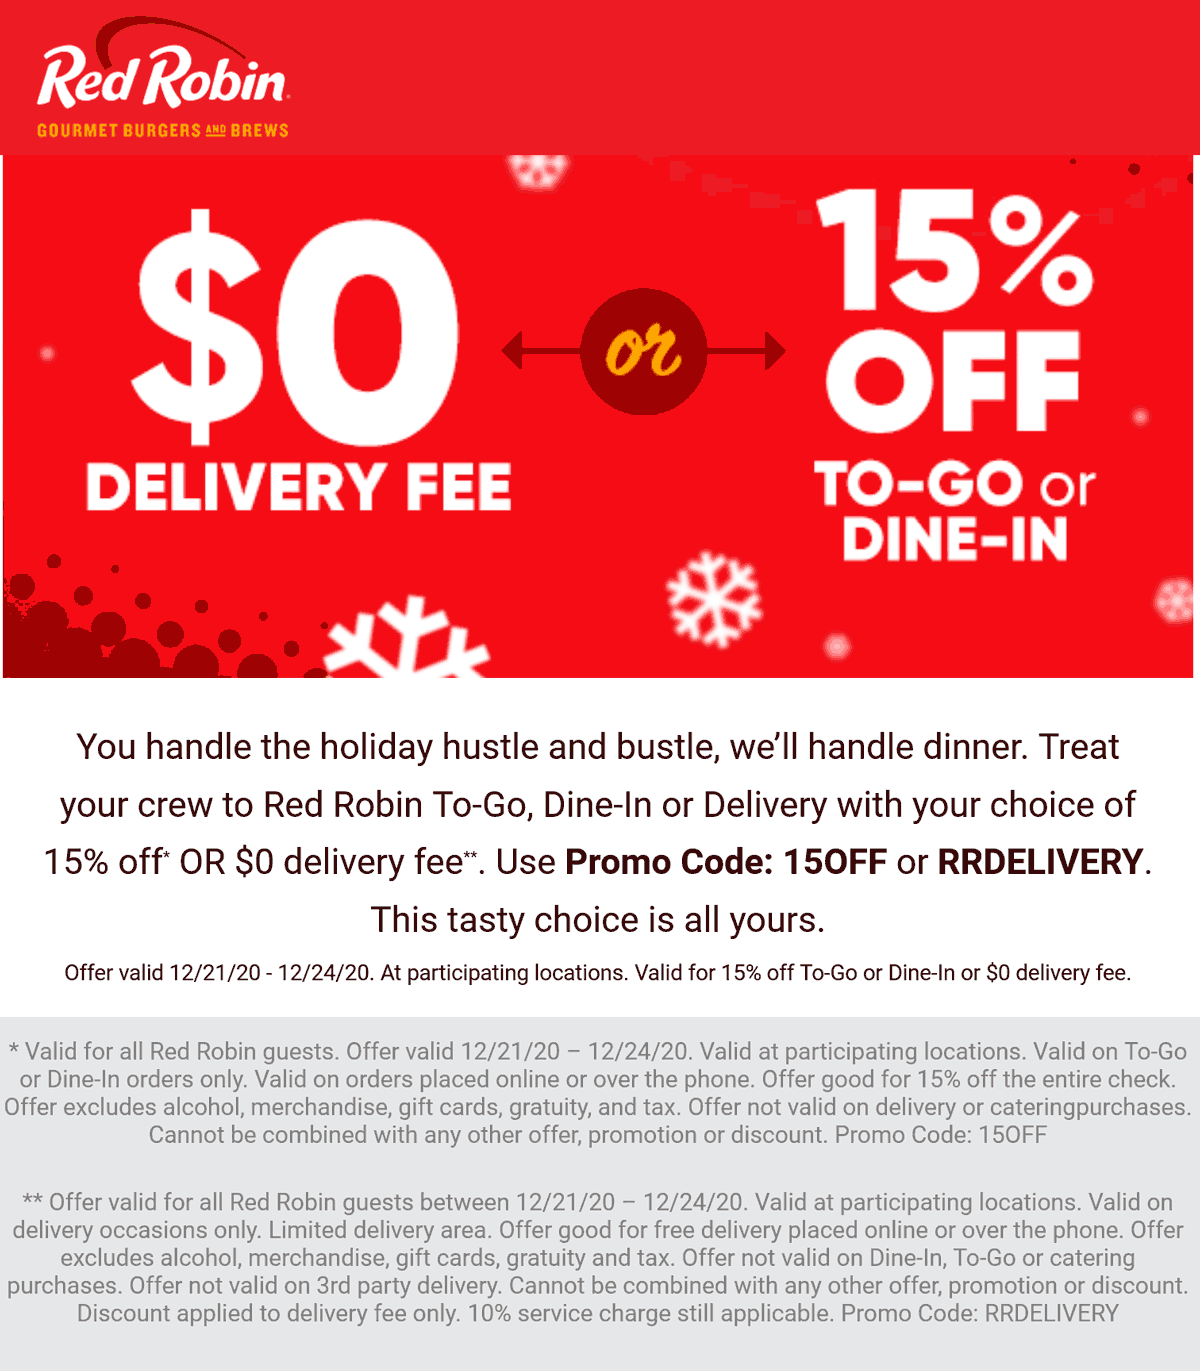 Red Robin restaurants Coupon  15% off & more at Red Robin restaurants via promo code 15OFF or RRDELIVERY #redrobin 